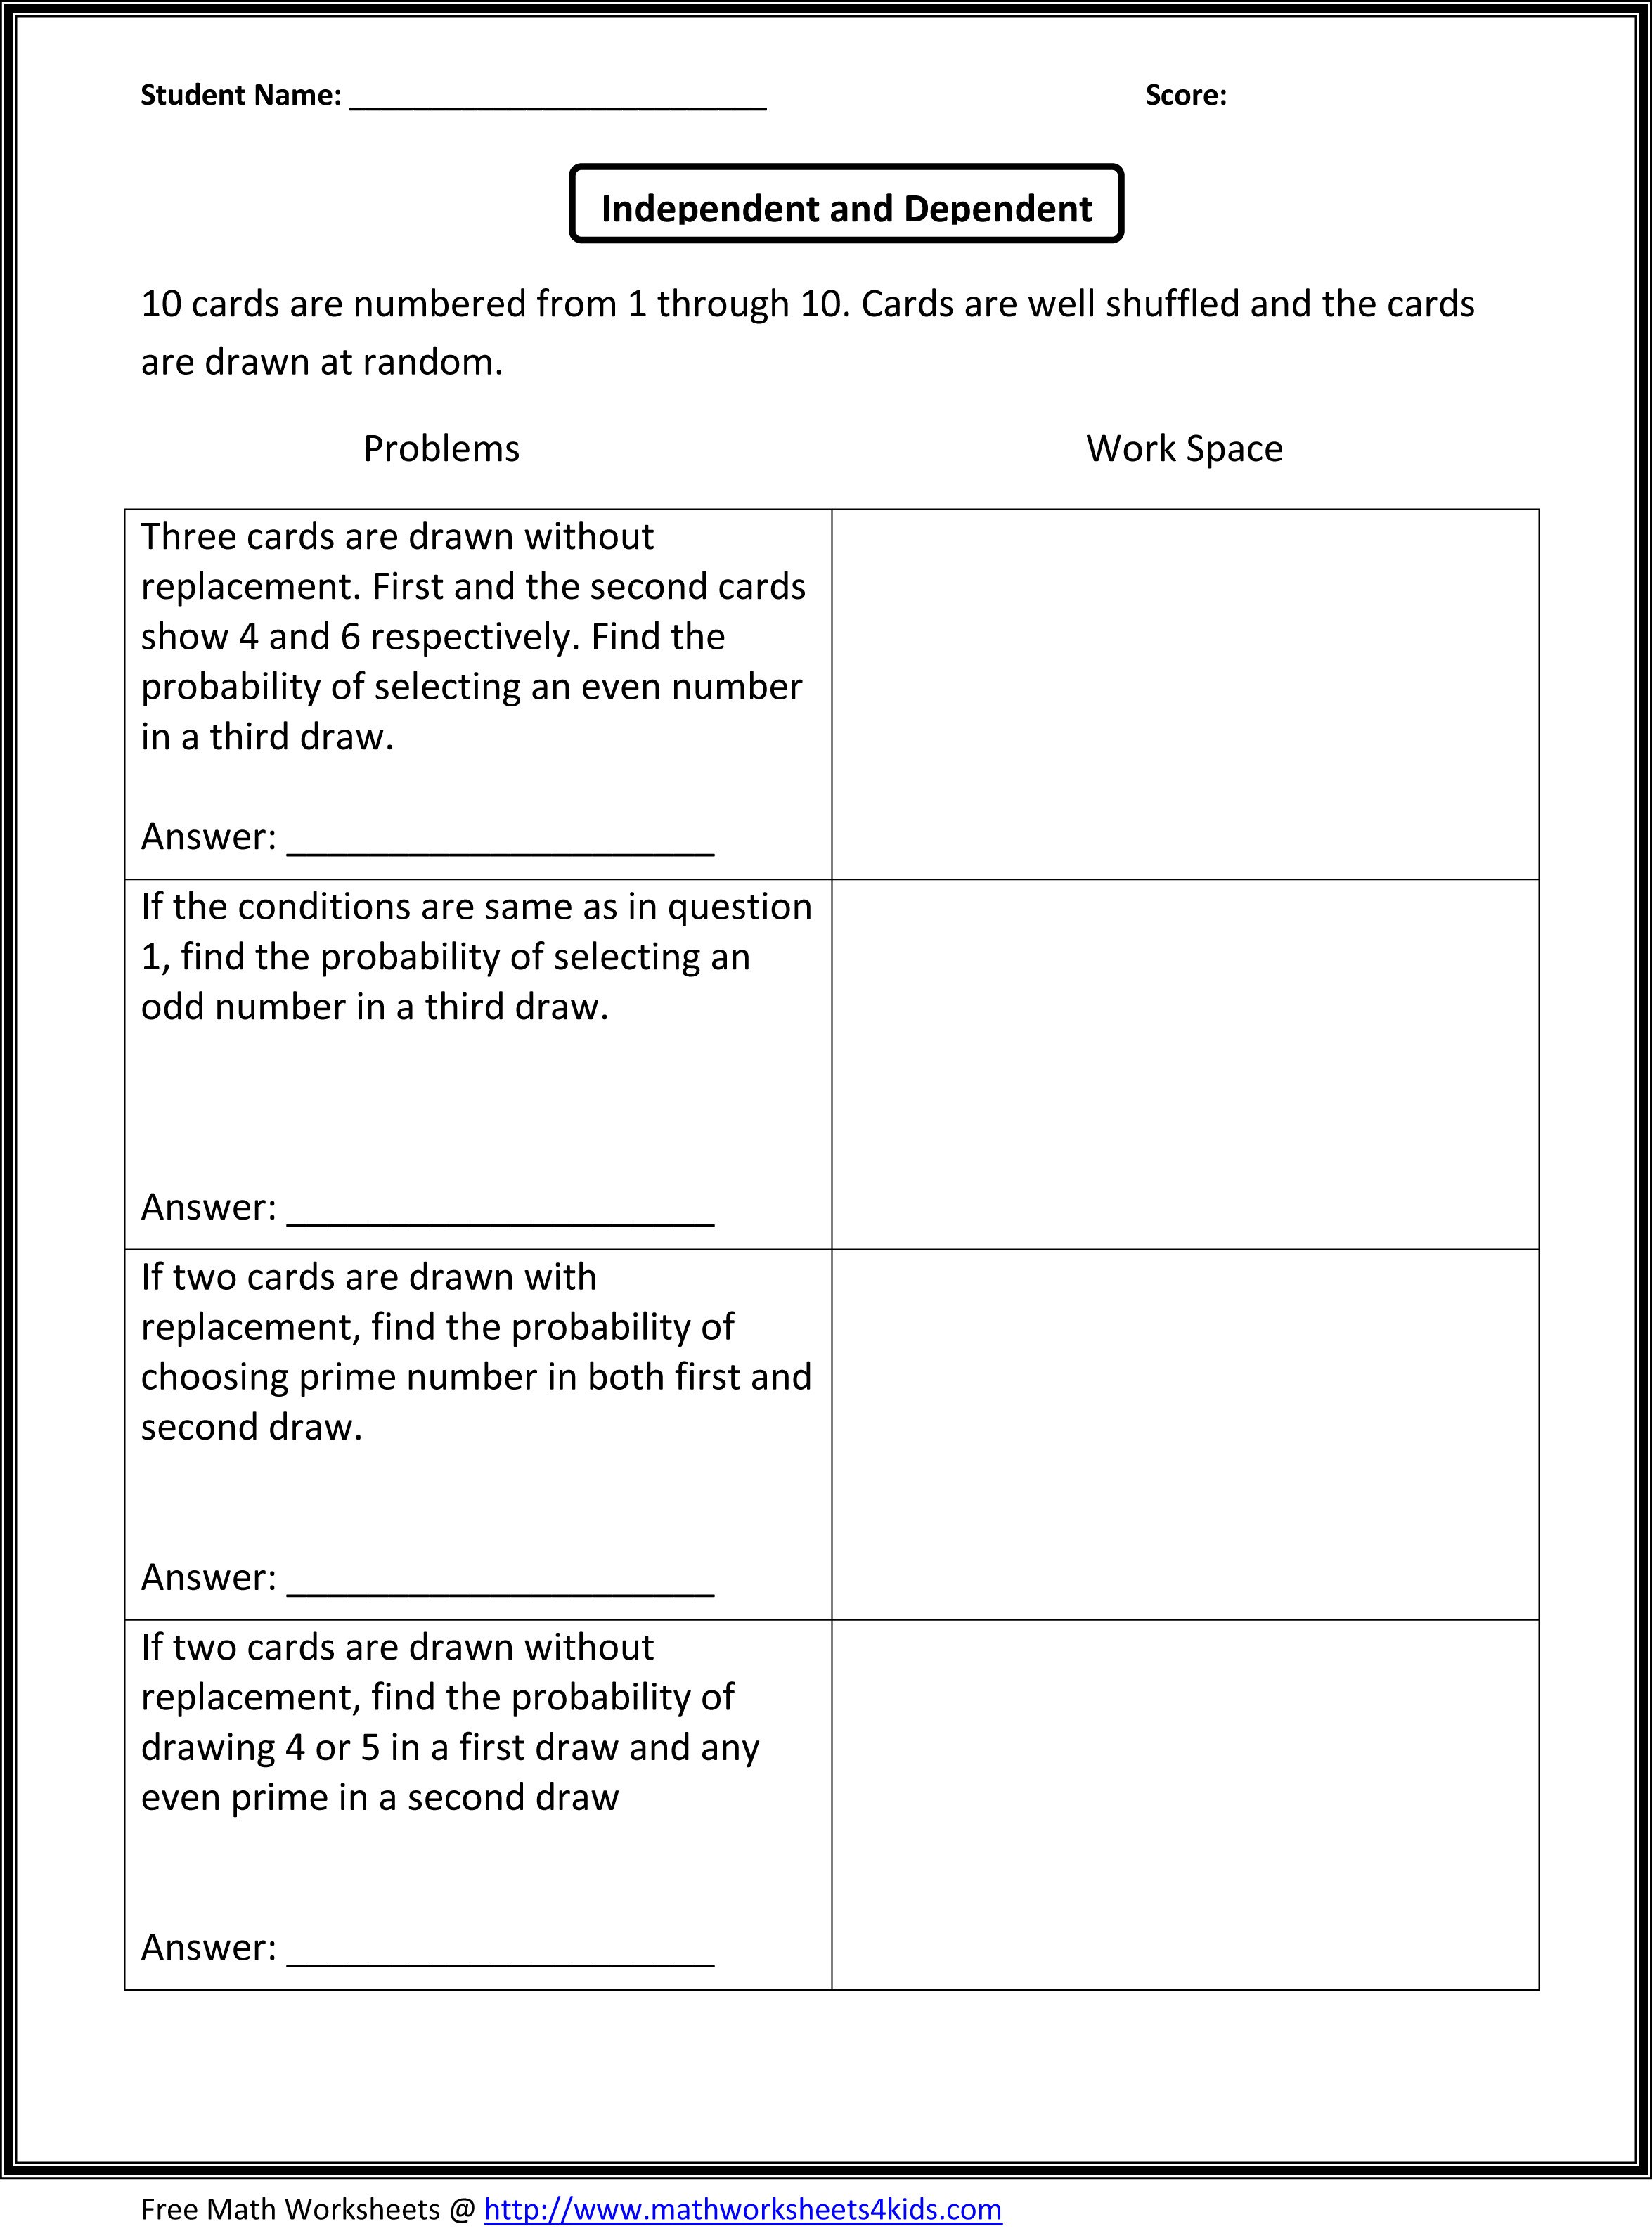 Theoretical Probability Worksheets 7th Grade Basic Probability Worksheets